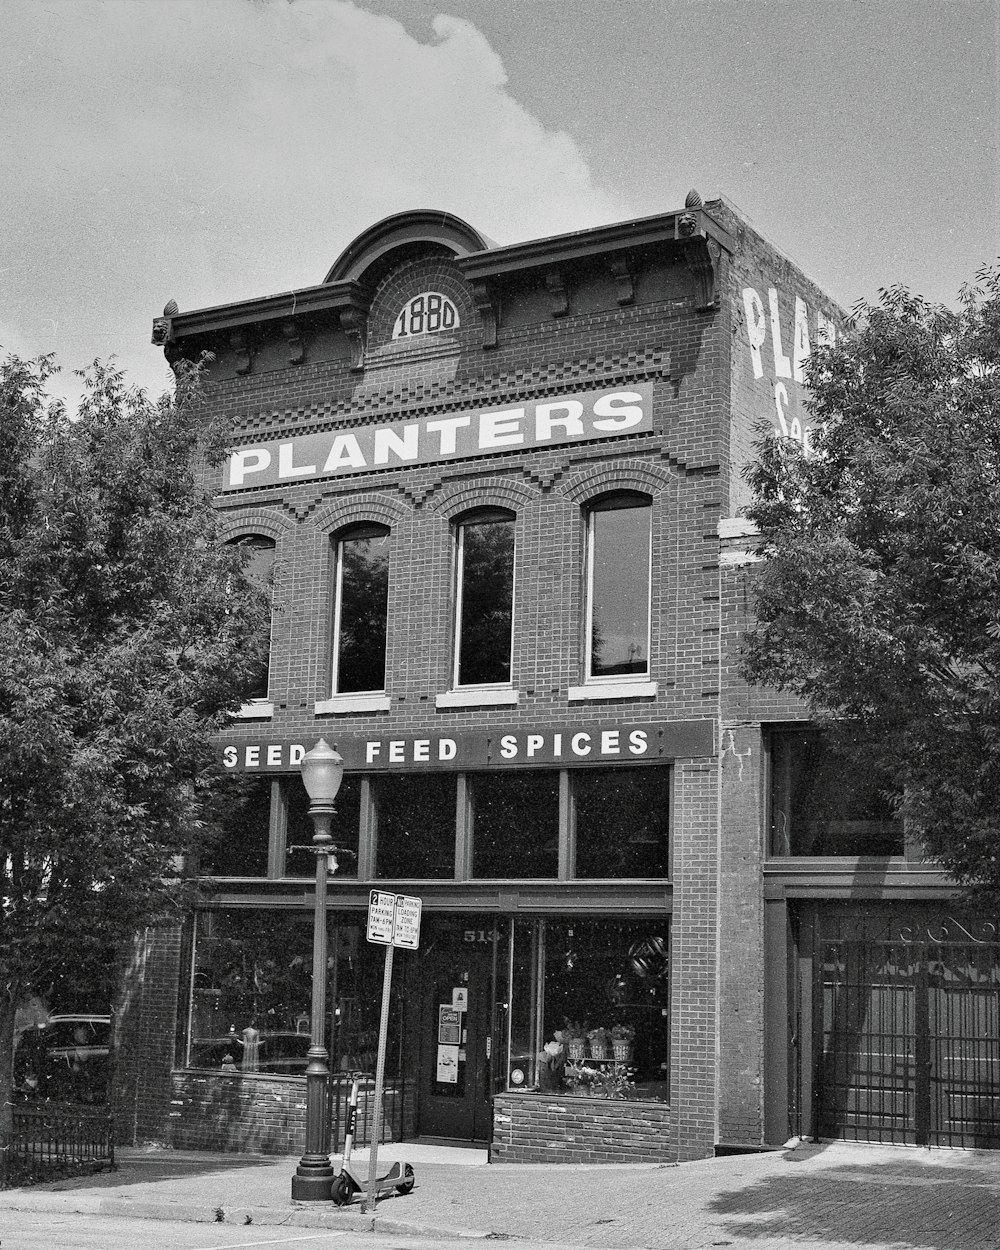 a black and white photo of a planter's store